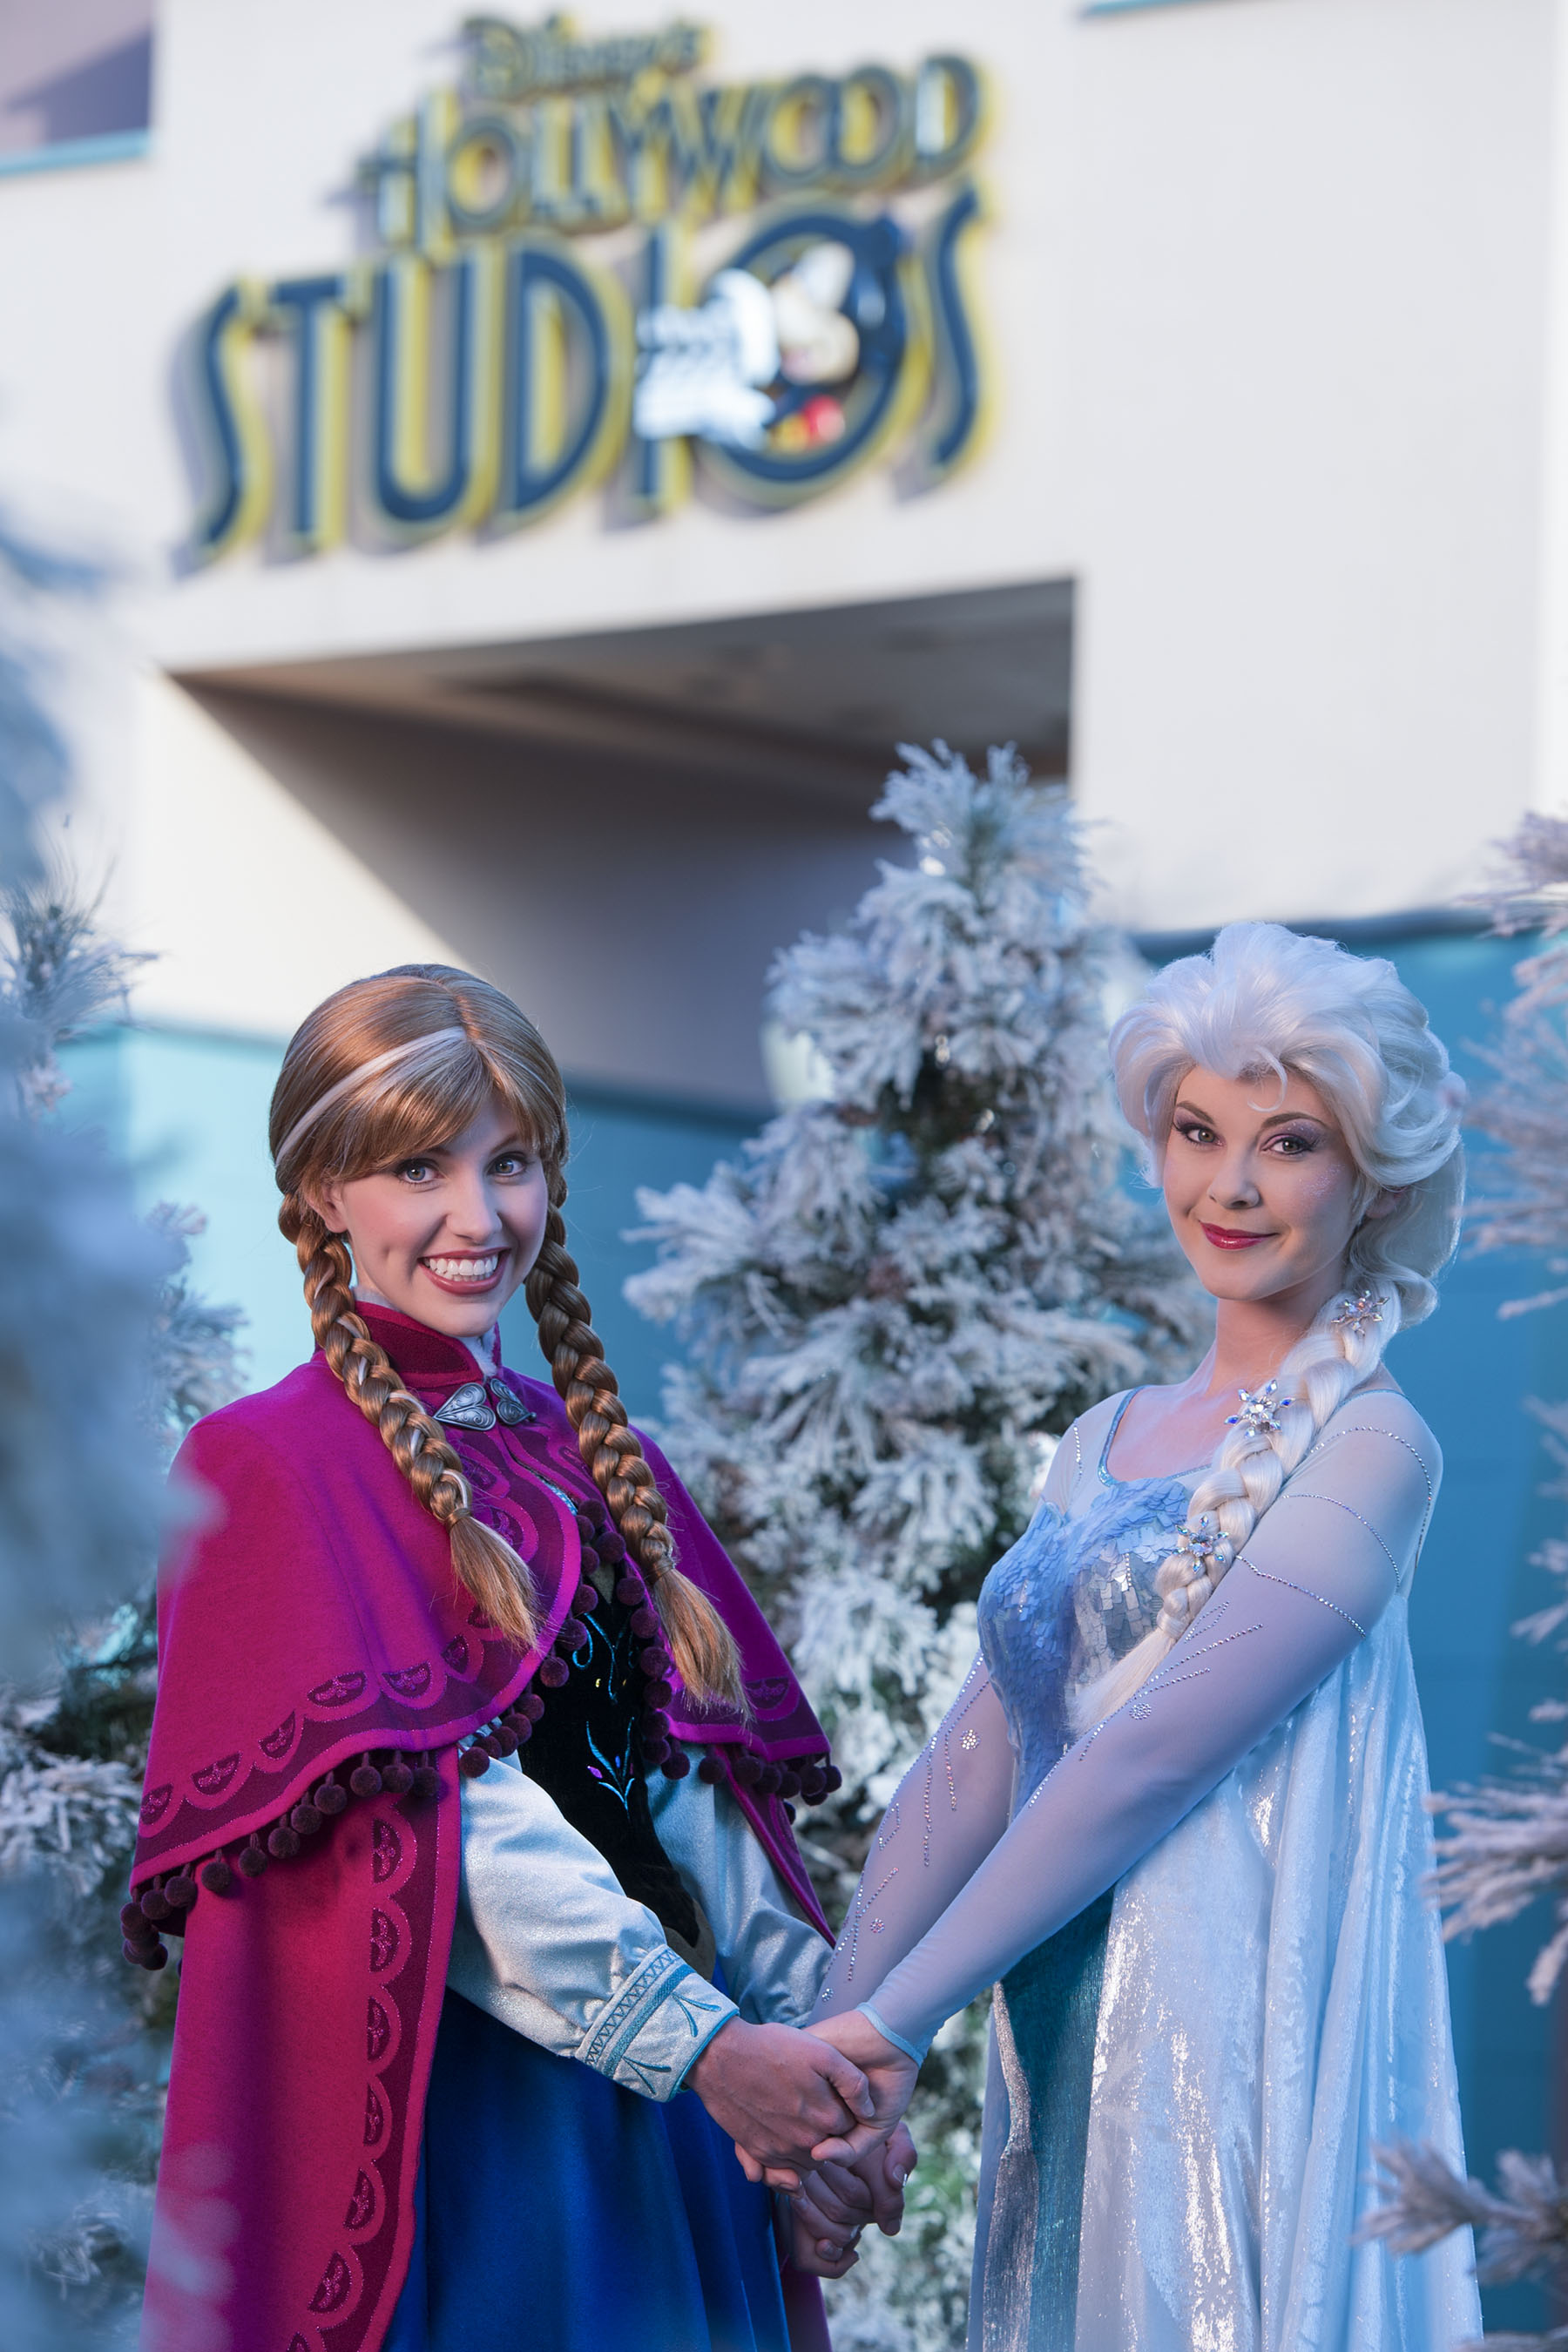 5 Tips to make the most of your “Frozen” day at Hollywood Studios